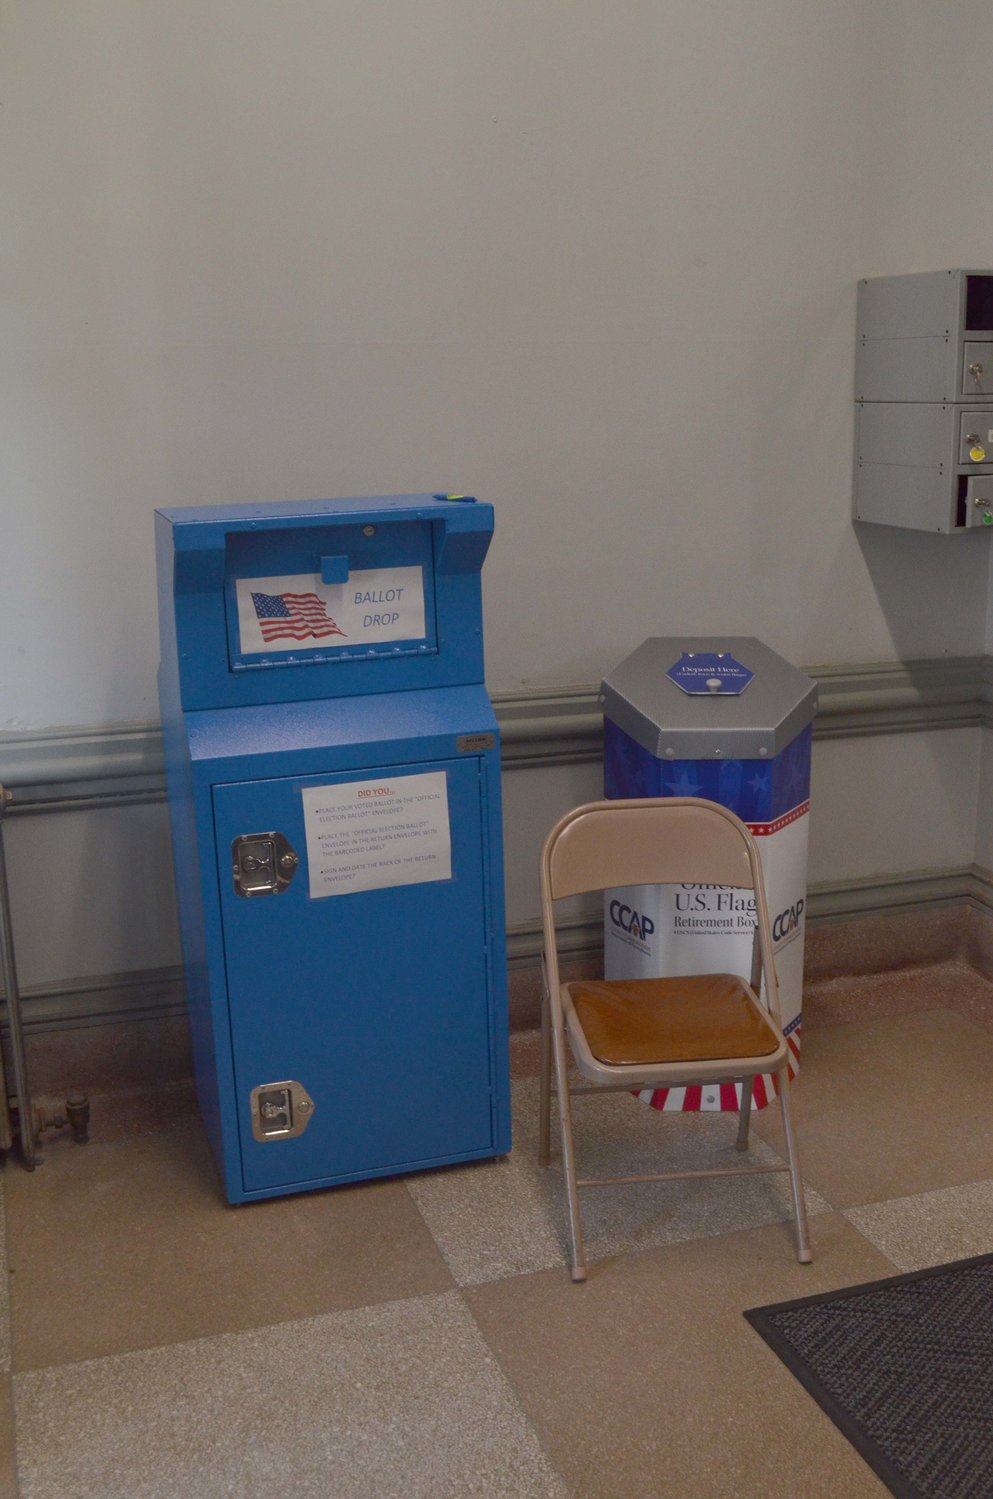 The drop box for Wayne County's elections, stationed inside the doors of the Wayne County Courthouse.